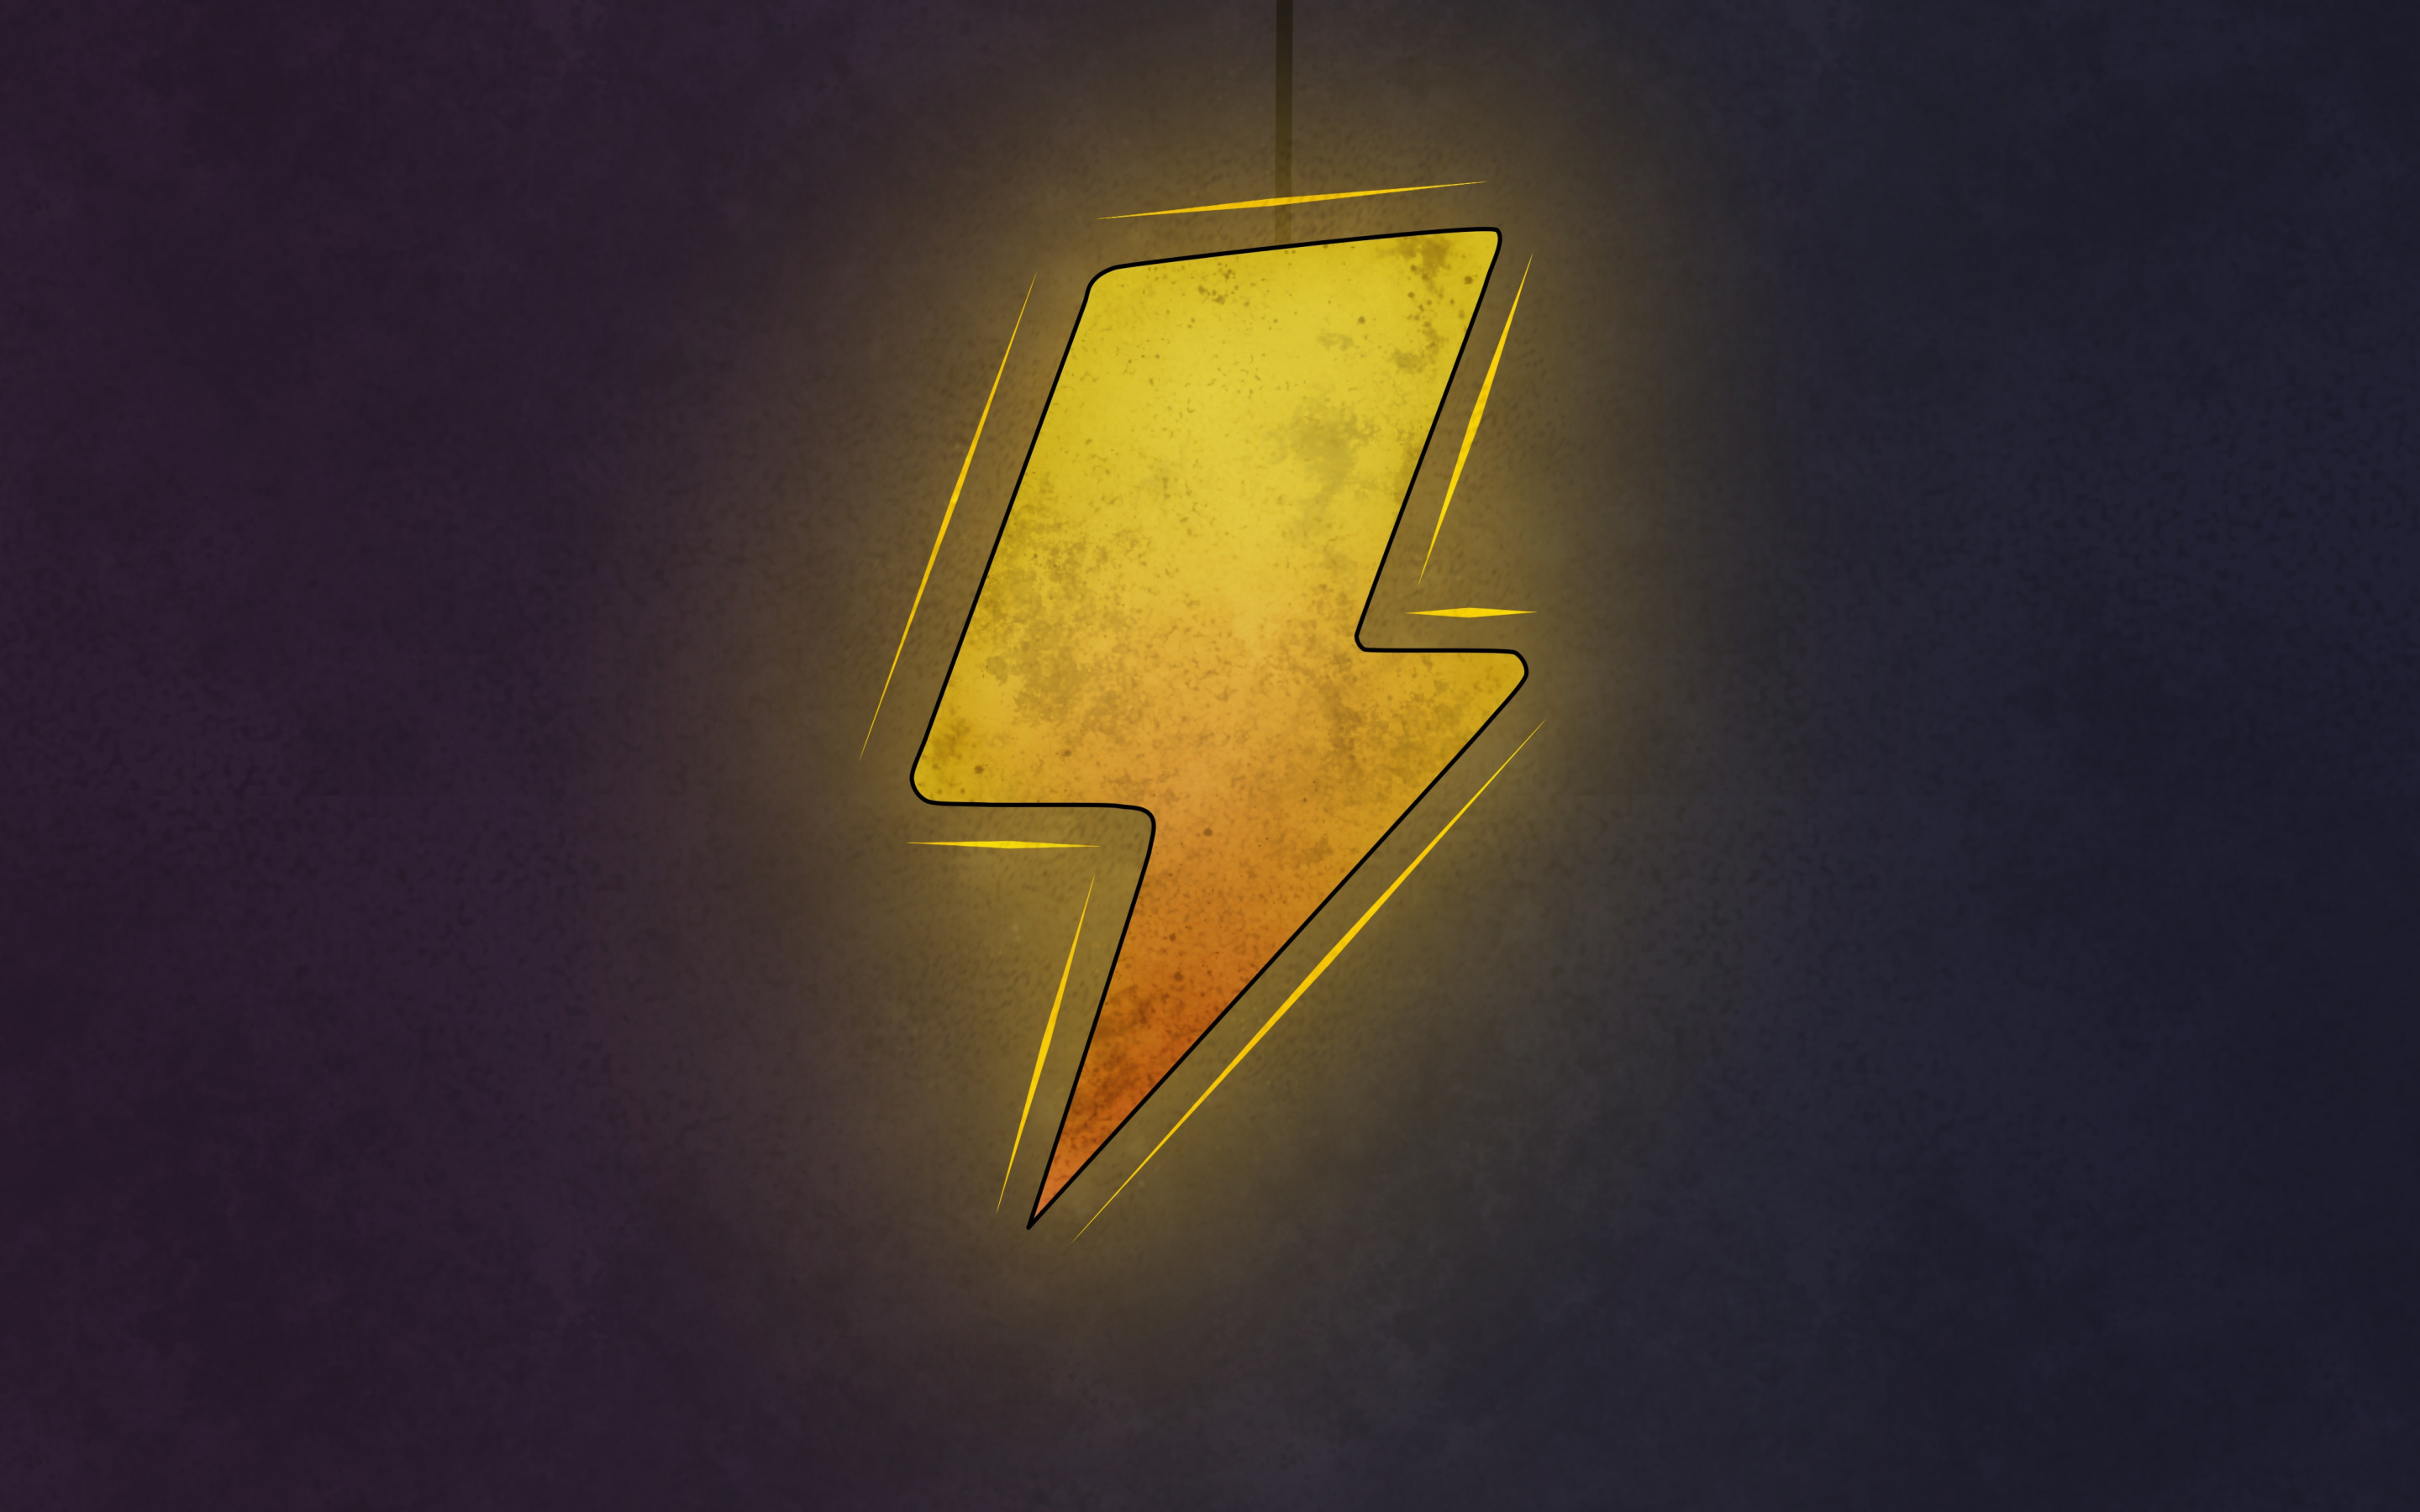 Download wallpaper lightning, grunge art, yellow glowing lightning, art, electricity creative sign, lightning sign for desktop with resolution 2880x1800. High Quality HD picture wallpaper